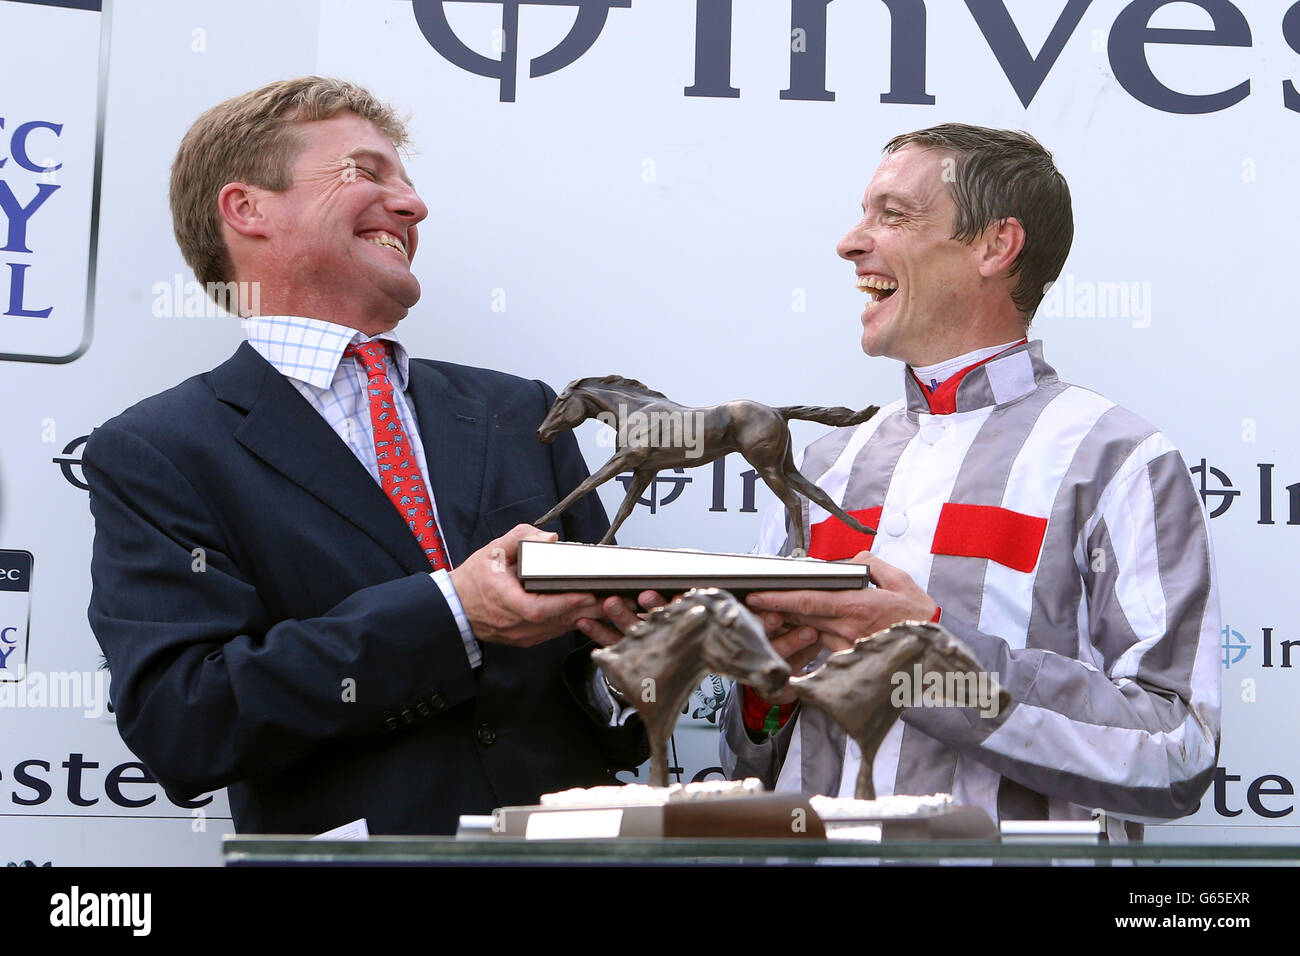 Horse Racing - The Investec Ladies Day - Epsom Downs Racecourse. Jockey Richard Hughes (right) and trainer Ralph Beckett (left) celebrate with the trophy after winning The Investec Oaks with Talent Stock Photo